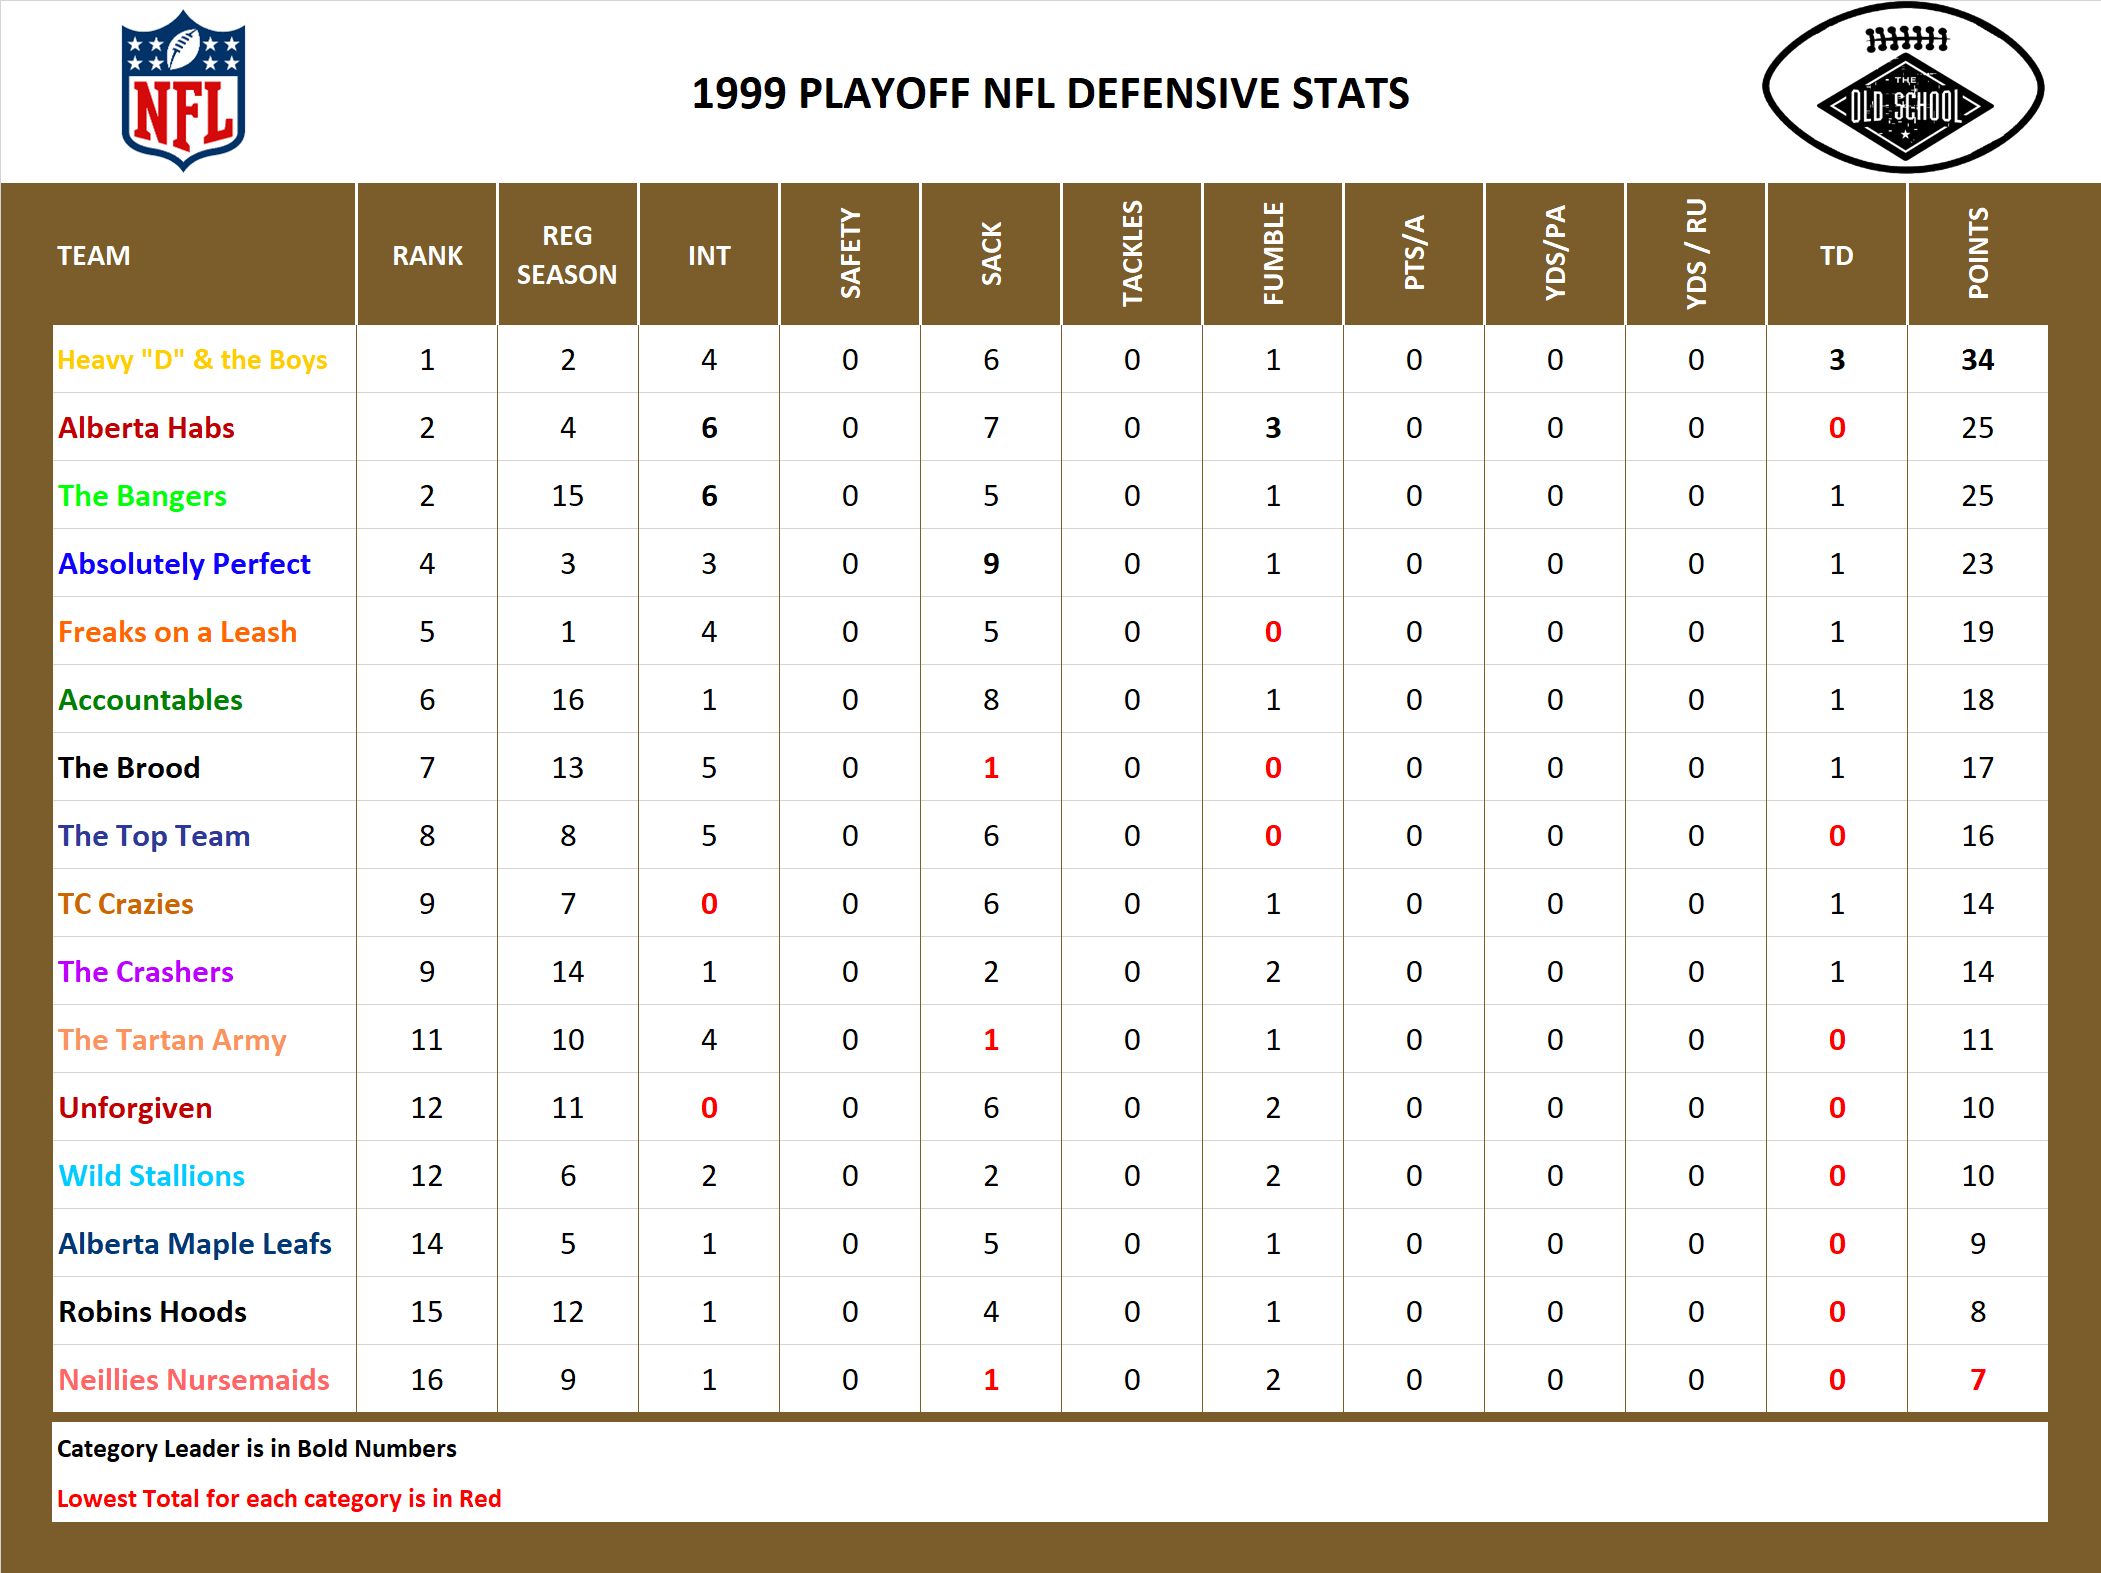 1999 National Football League Pool Playoff Defensive Stats